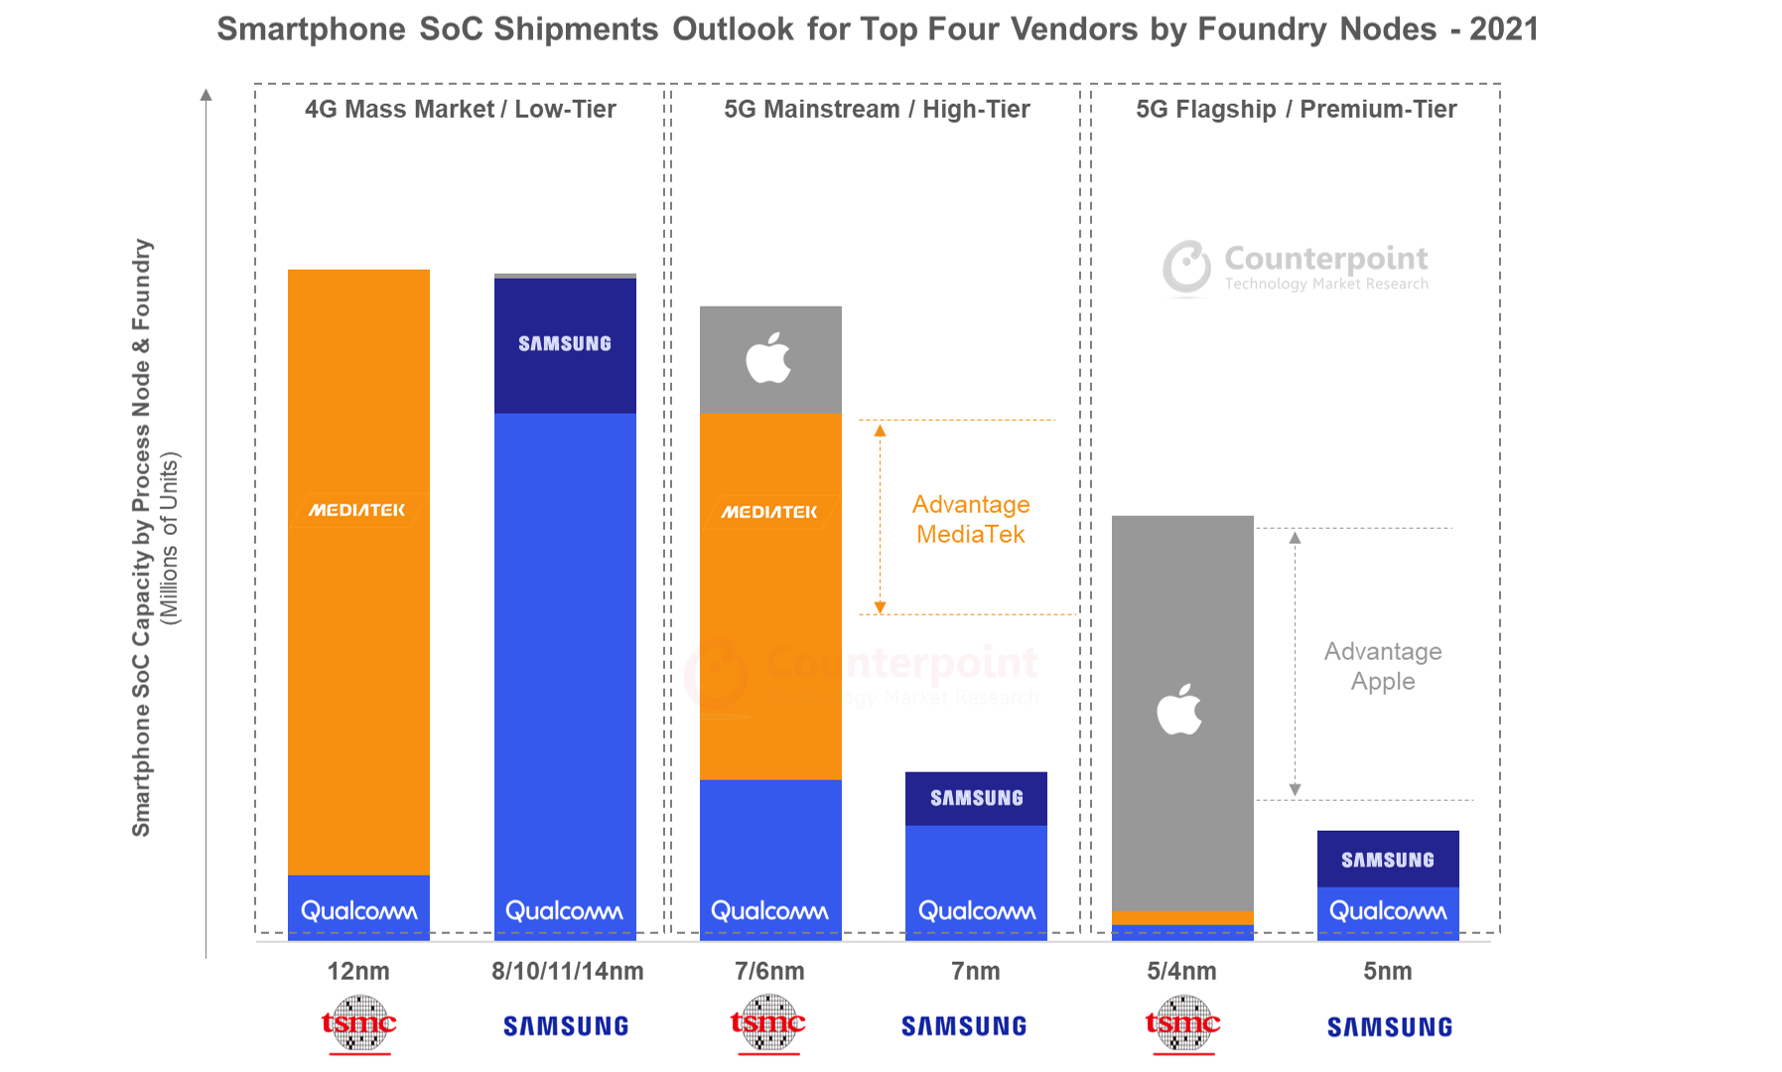 Counterpoint Research Smartphone SoC Shipments Outlook for Top Four Vendors by Foundry Nodes - 2021